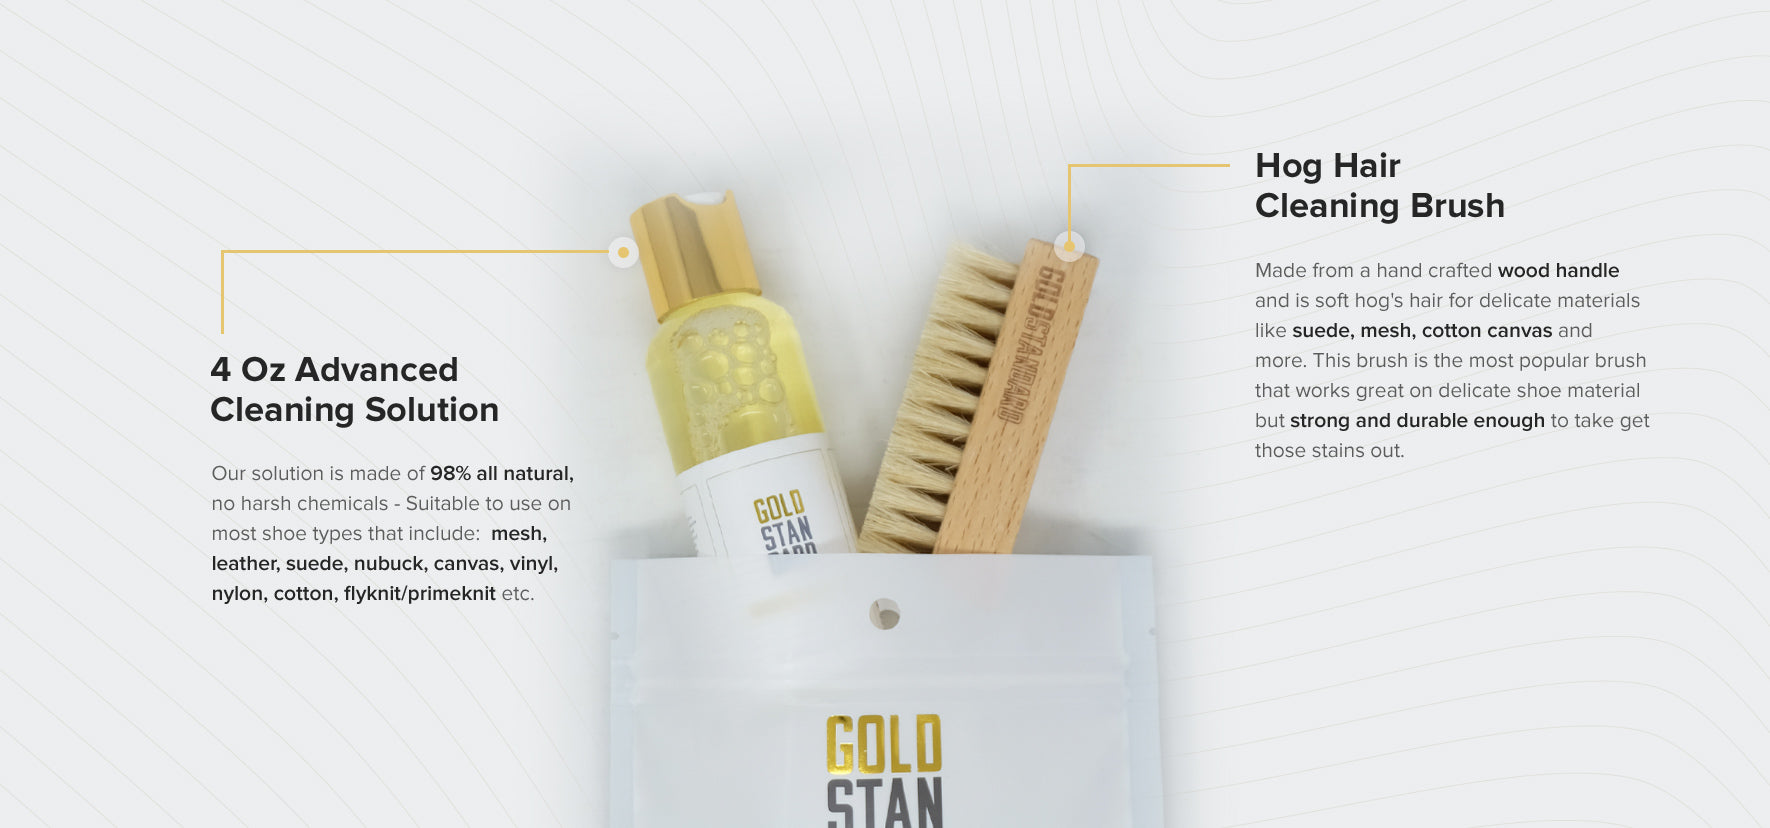 Gold Standard Premium Shoe Cleaning Brush Easy to Hold Soft Hog Hair Bristles